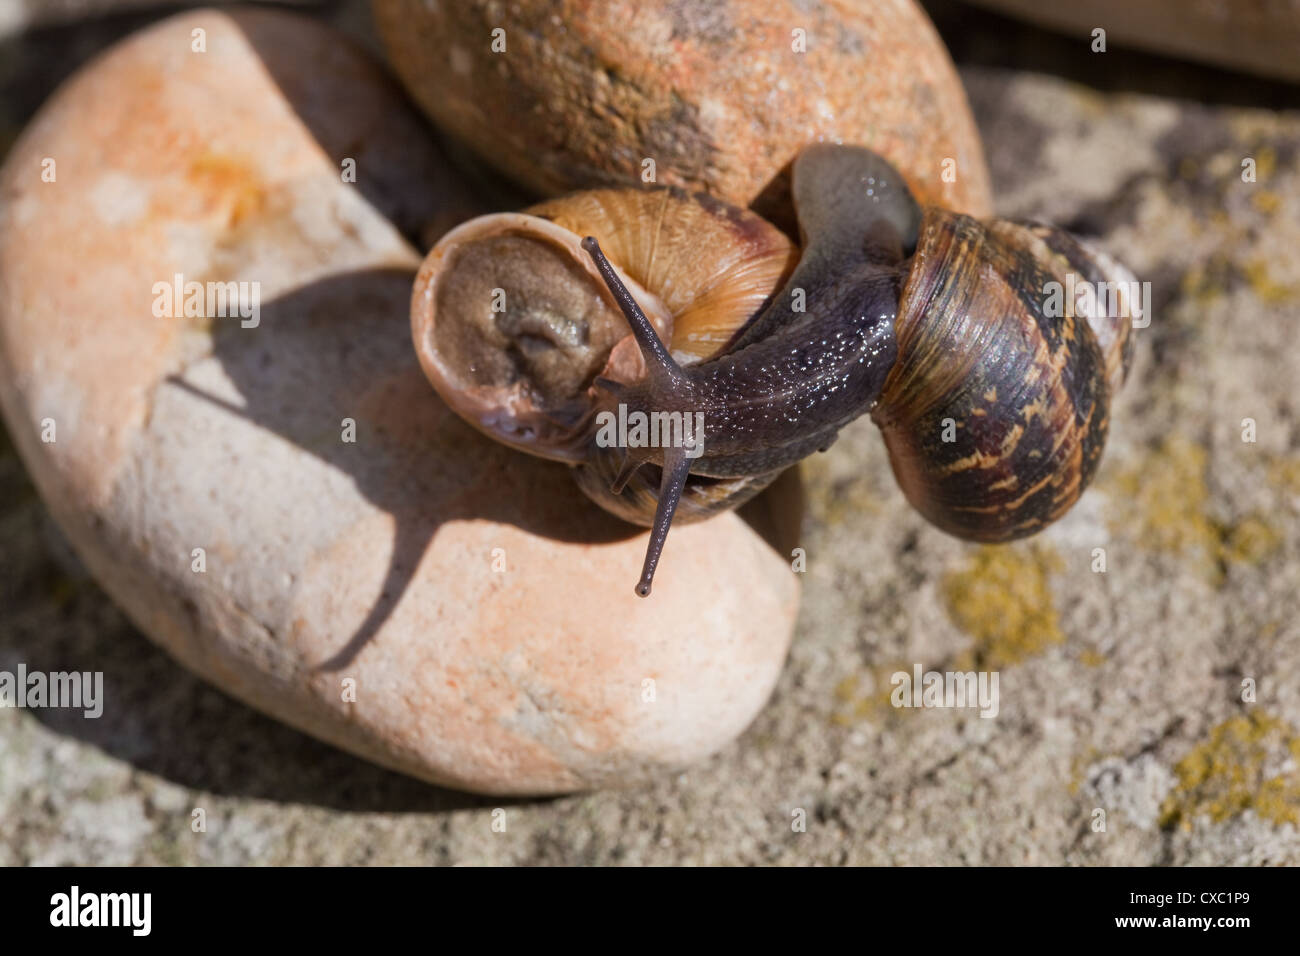 Garden Snails (Helix aspersa). One clambering over another, showing eyes 'on stalks', or upper tentacles. Stock Photo